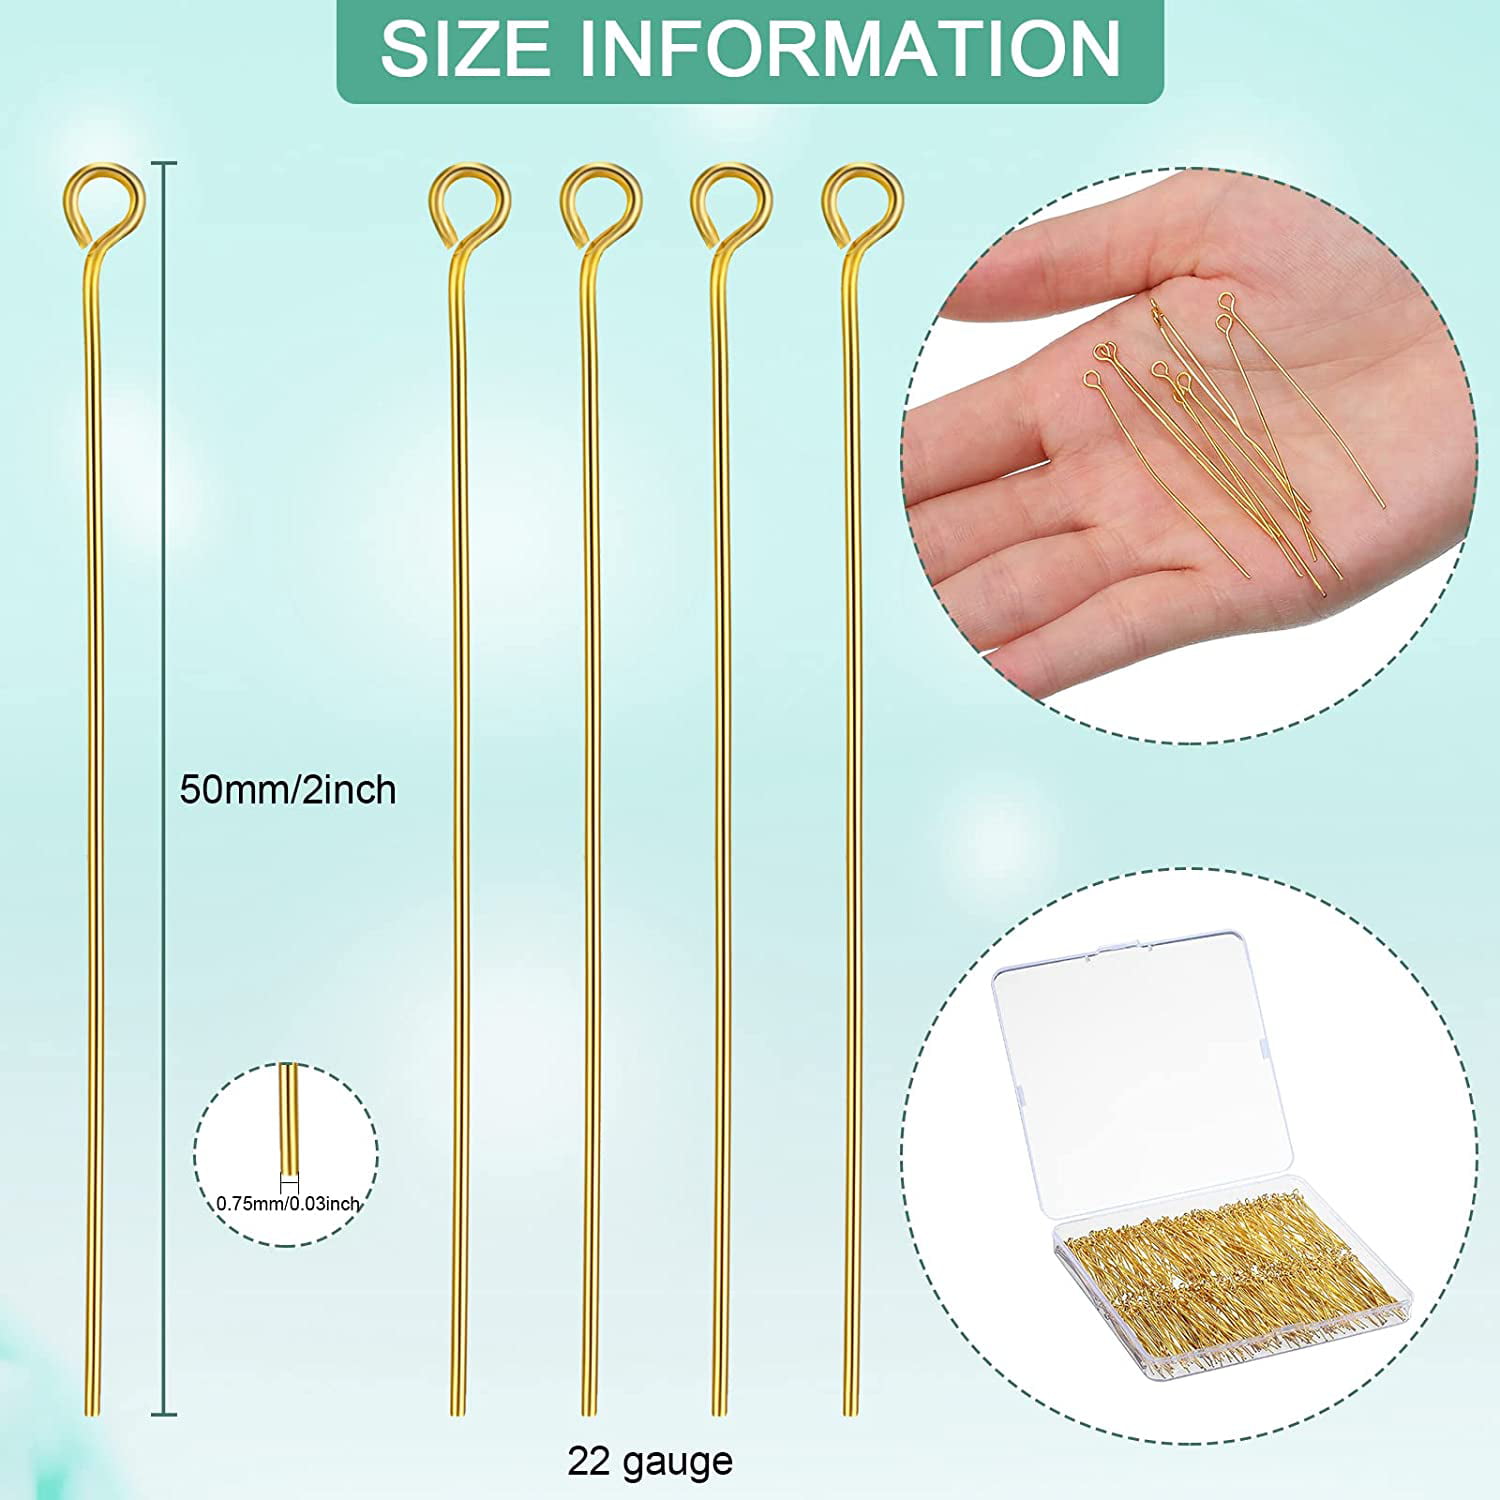 500 Pieces Eye Pins 50 mm Jewelry Making Pin Heads Eye Jewelry Head Pins for Jewelry Making DIY Ball Head Pins for Craft Earring Bracelet Jewelry